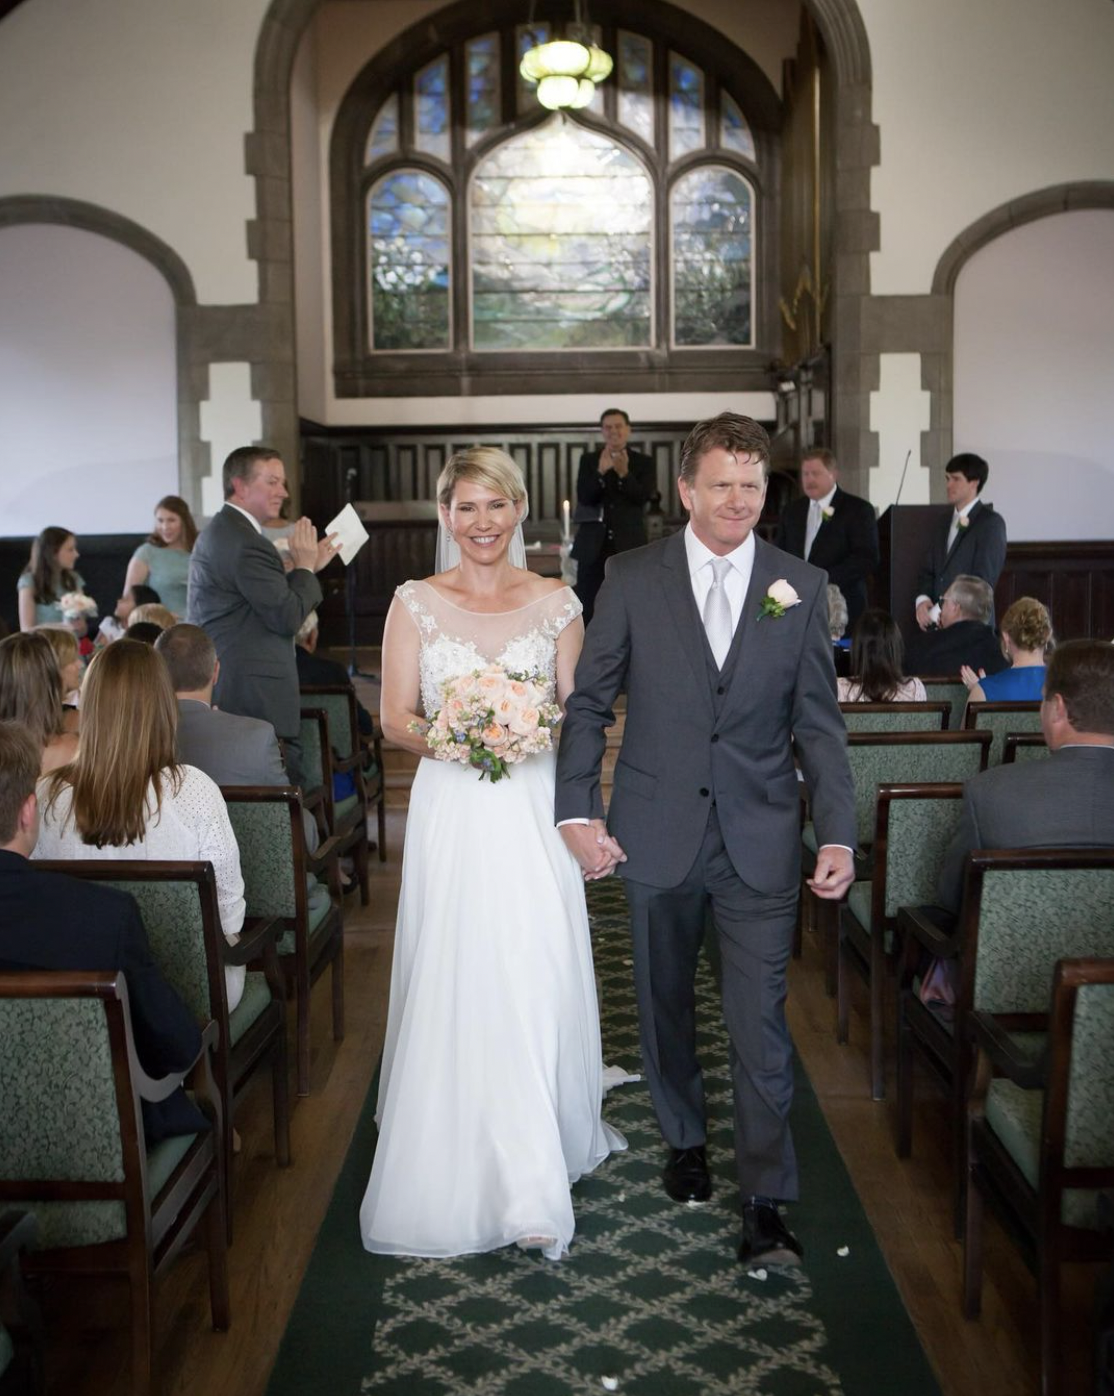 Bride and groom smile brightly as they walk back down the aisle as a married couple